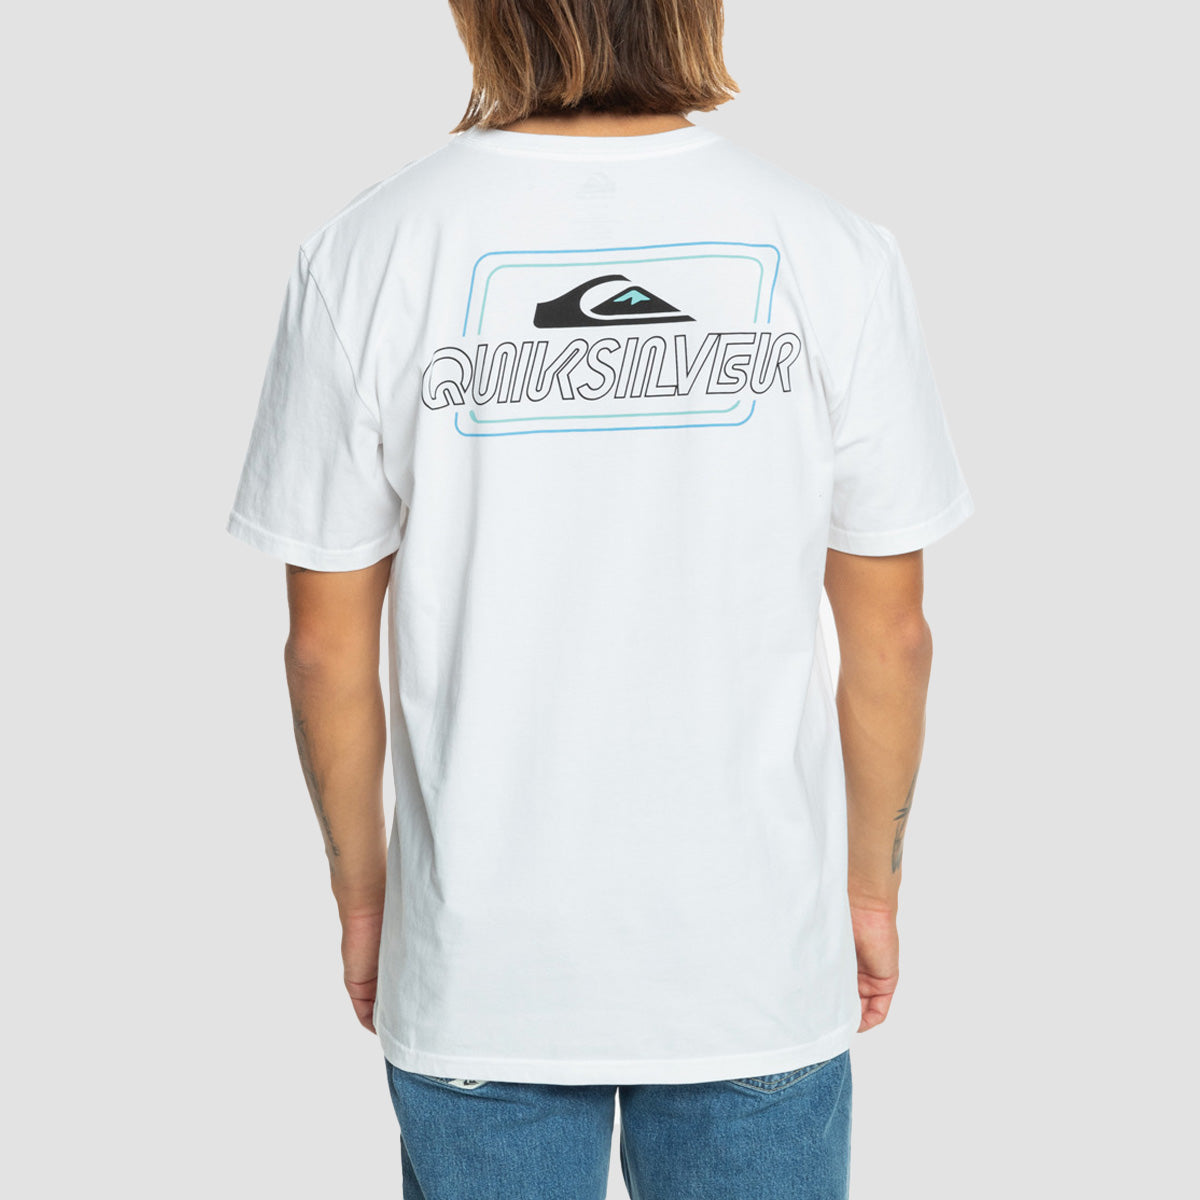 Quiksilver Line By Line T-Shirt White